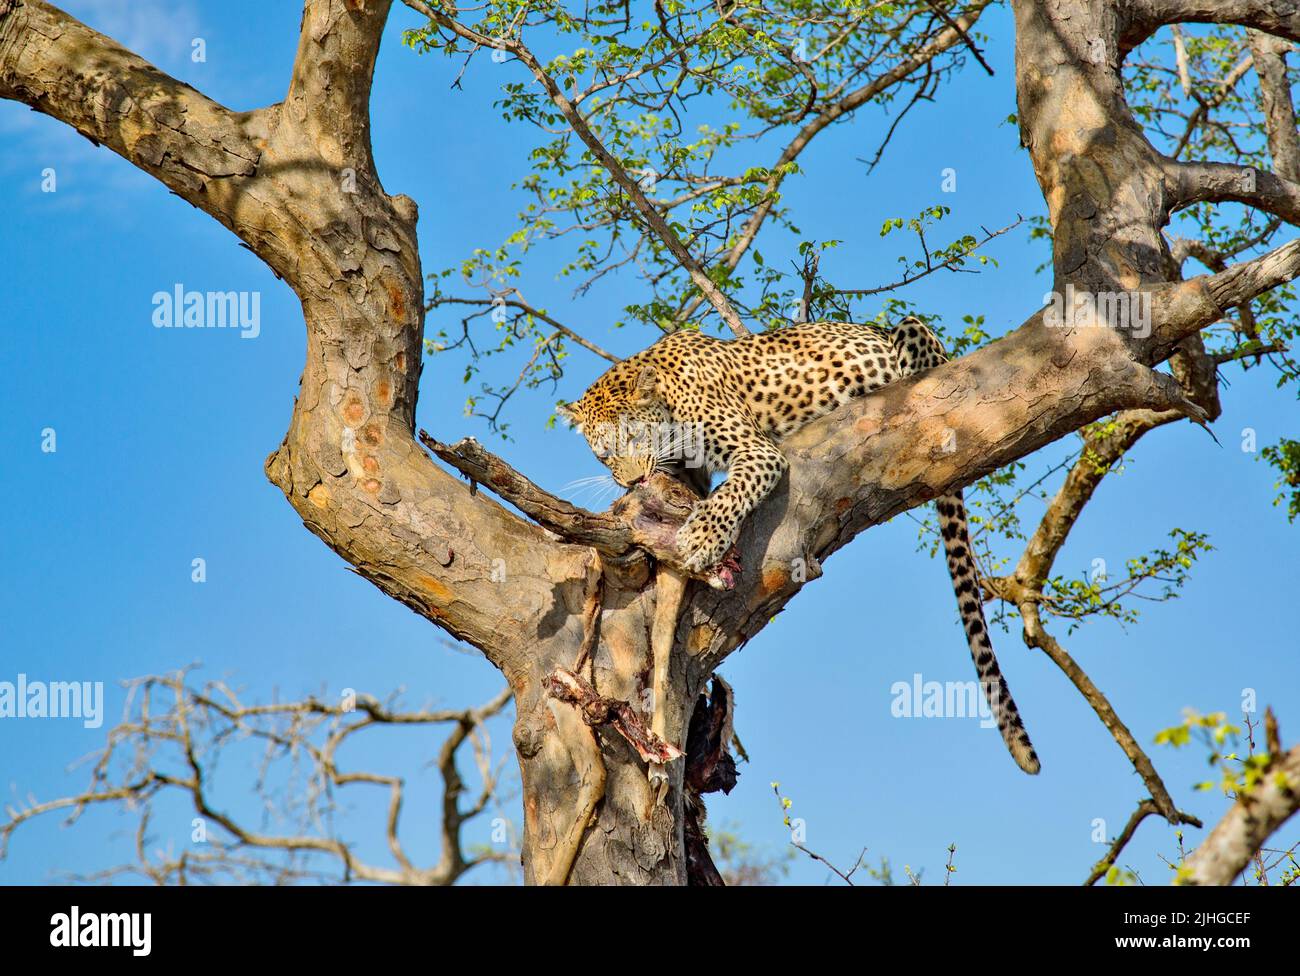 A Leopard in a tree, eating the antelope it has killed. Kruger National Park, South Africa. Stock Photo